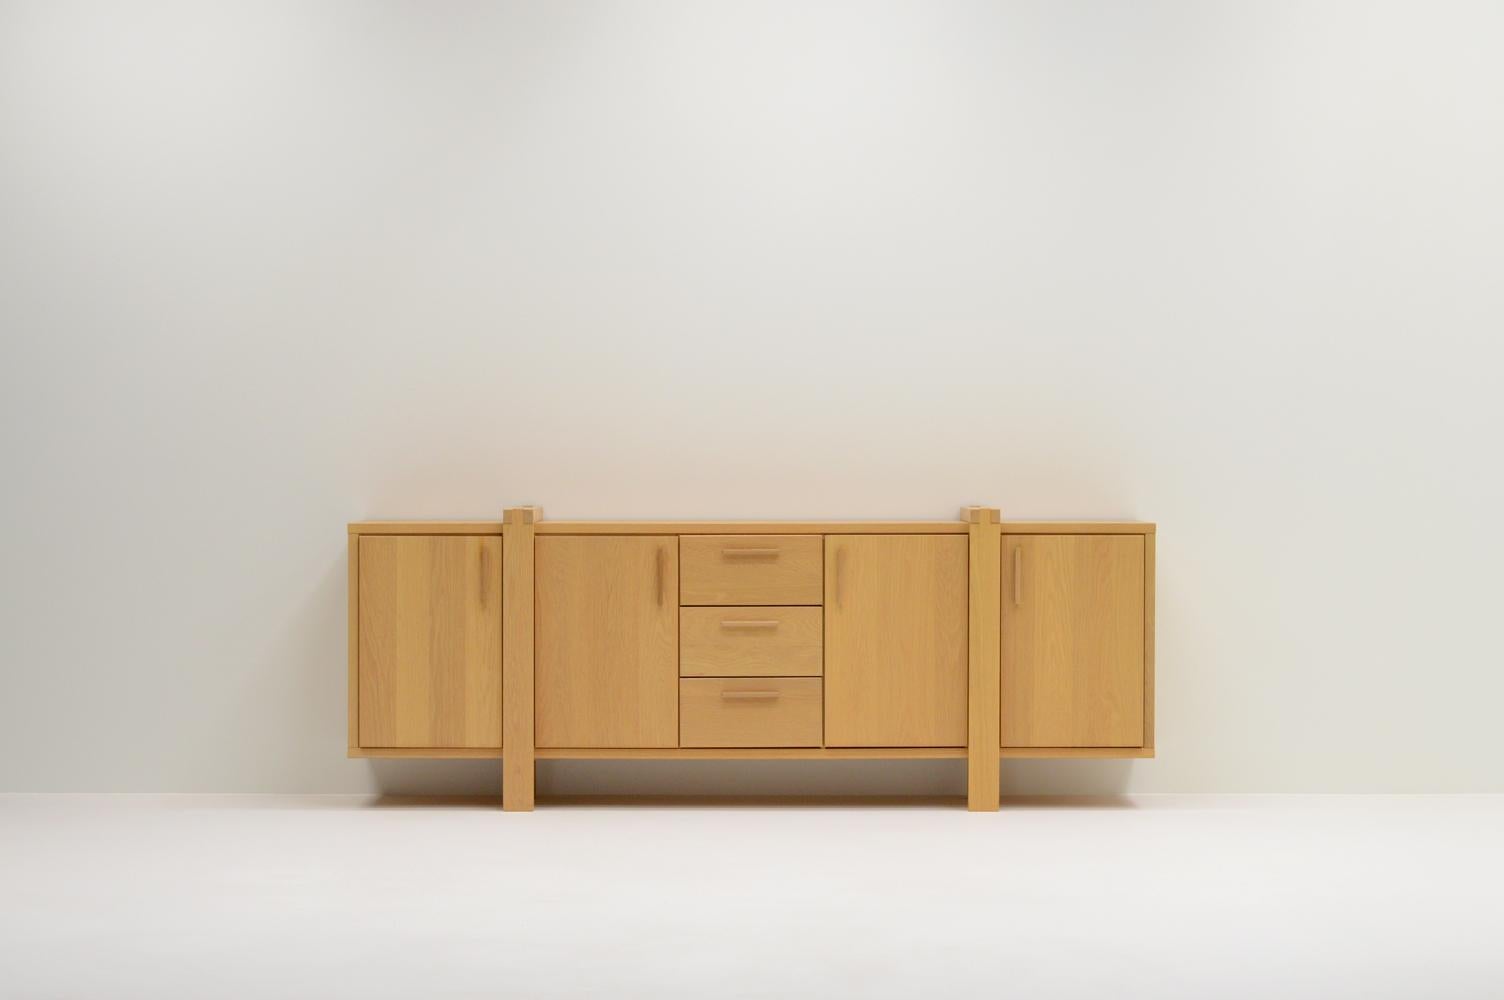 Large Belgium oak sideboard. Mostly made of solid oak. 3 drawers and 4 doors. Behind every door are modular shelfs. In very good vintage condition.

Request a quote for the latest shipping rates.